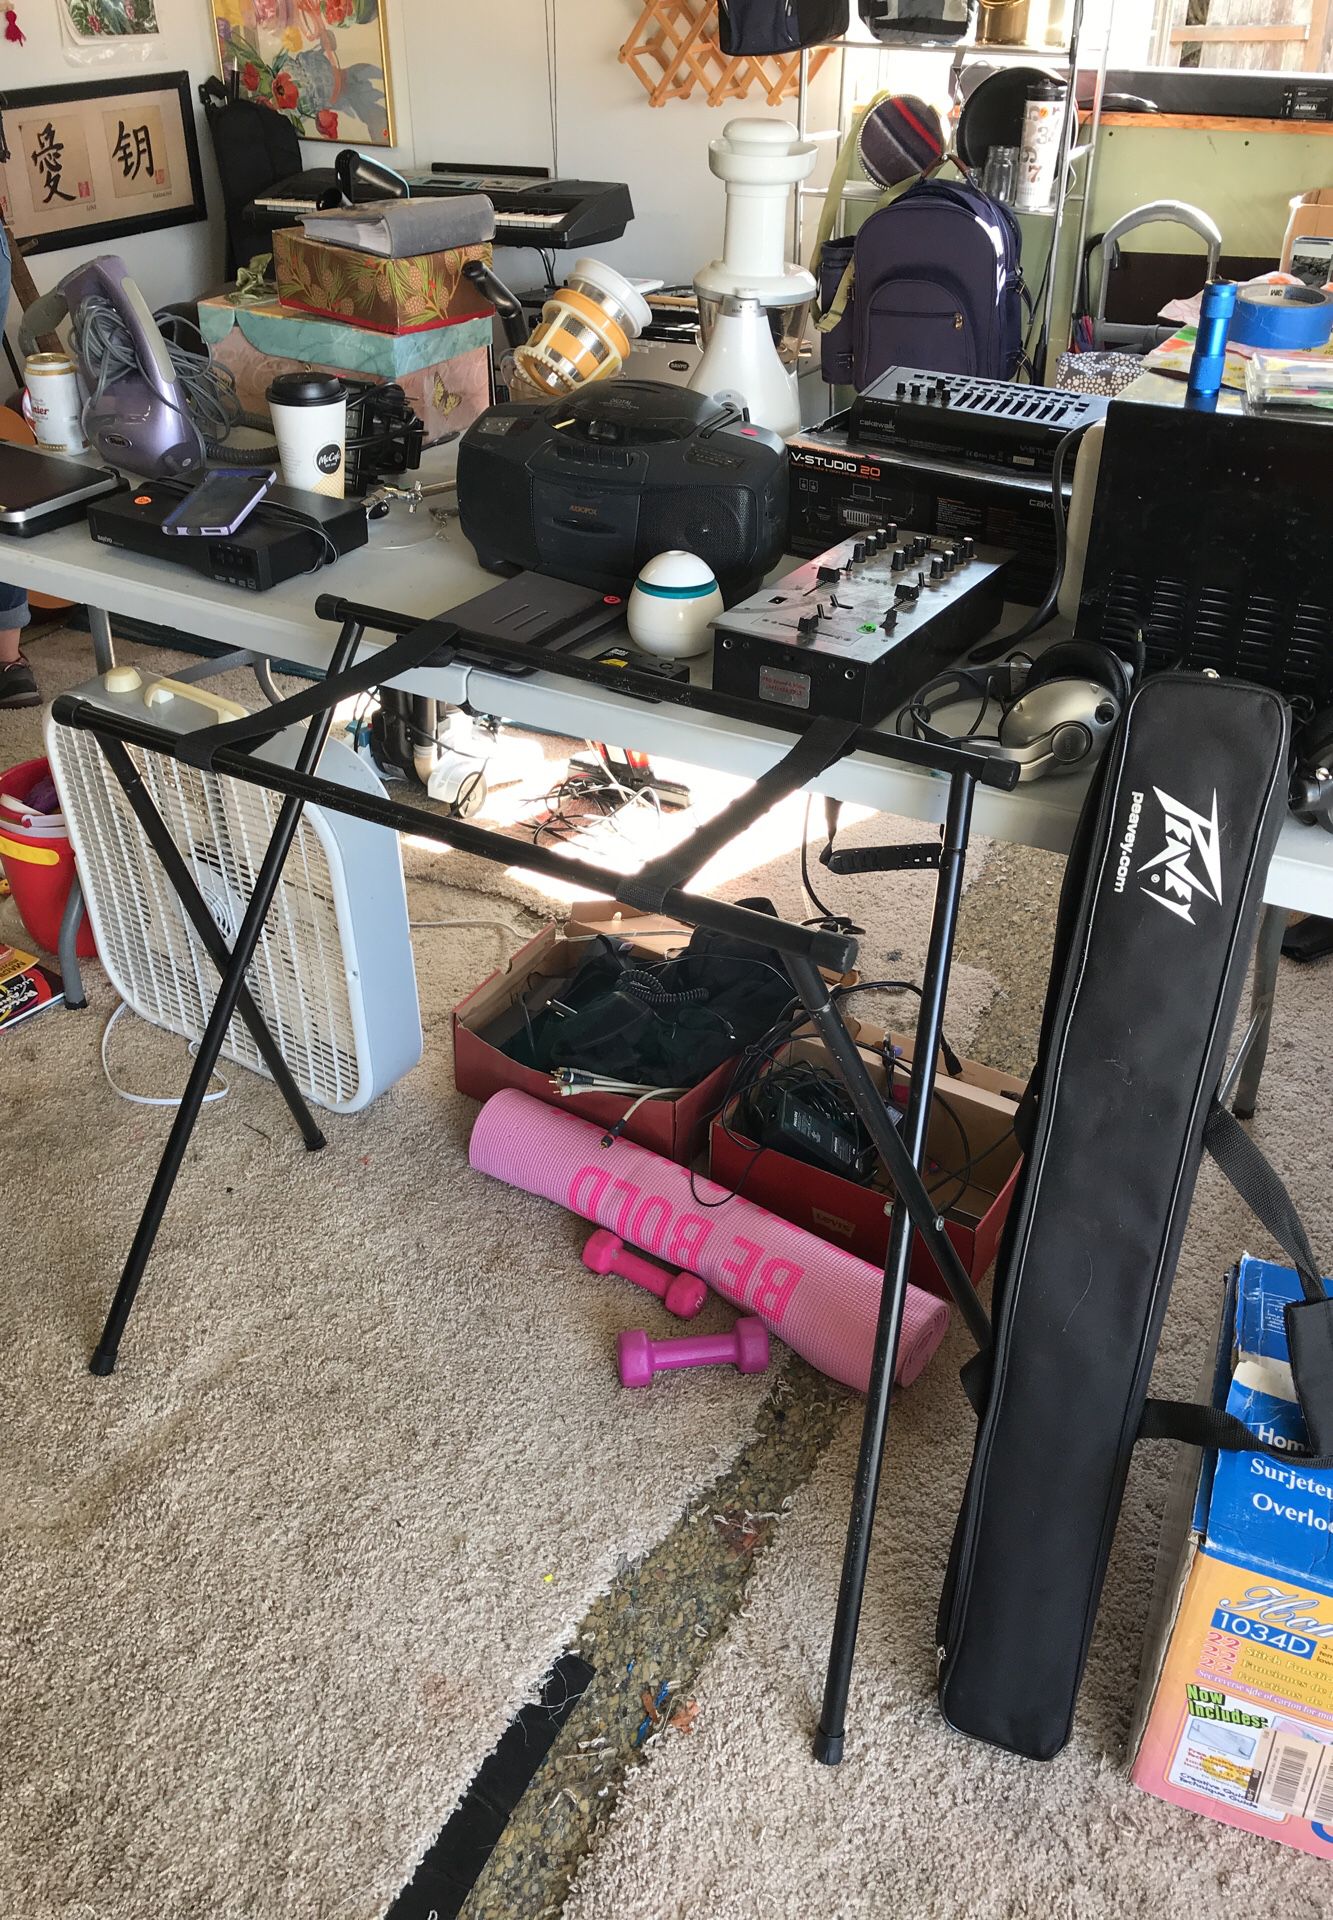 PEAVEY KEYBOARD STAND AND CASE MUSICAL EQUIPMENT